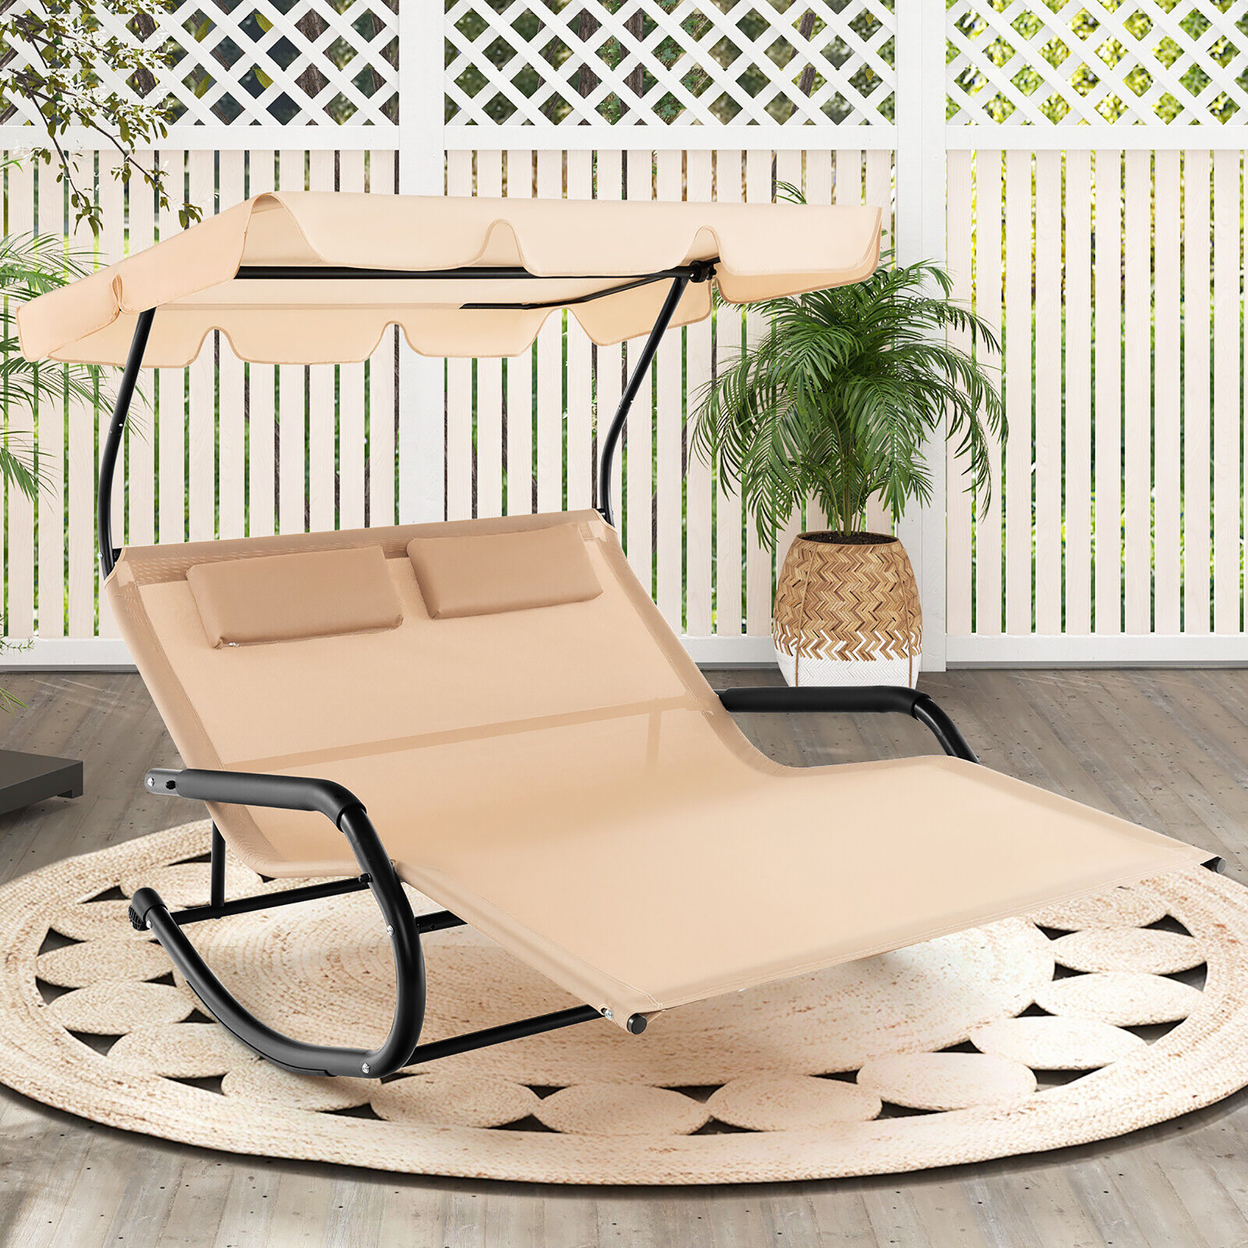 Outdoor 2-Person Double Rocking Chaise Lounge W/ Canopy & Wheels Metal Frame